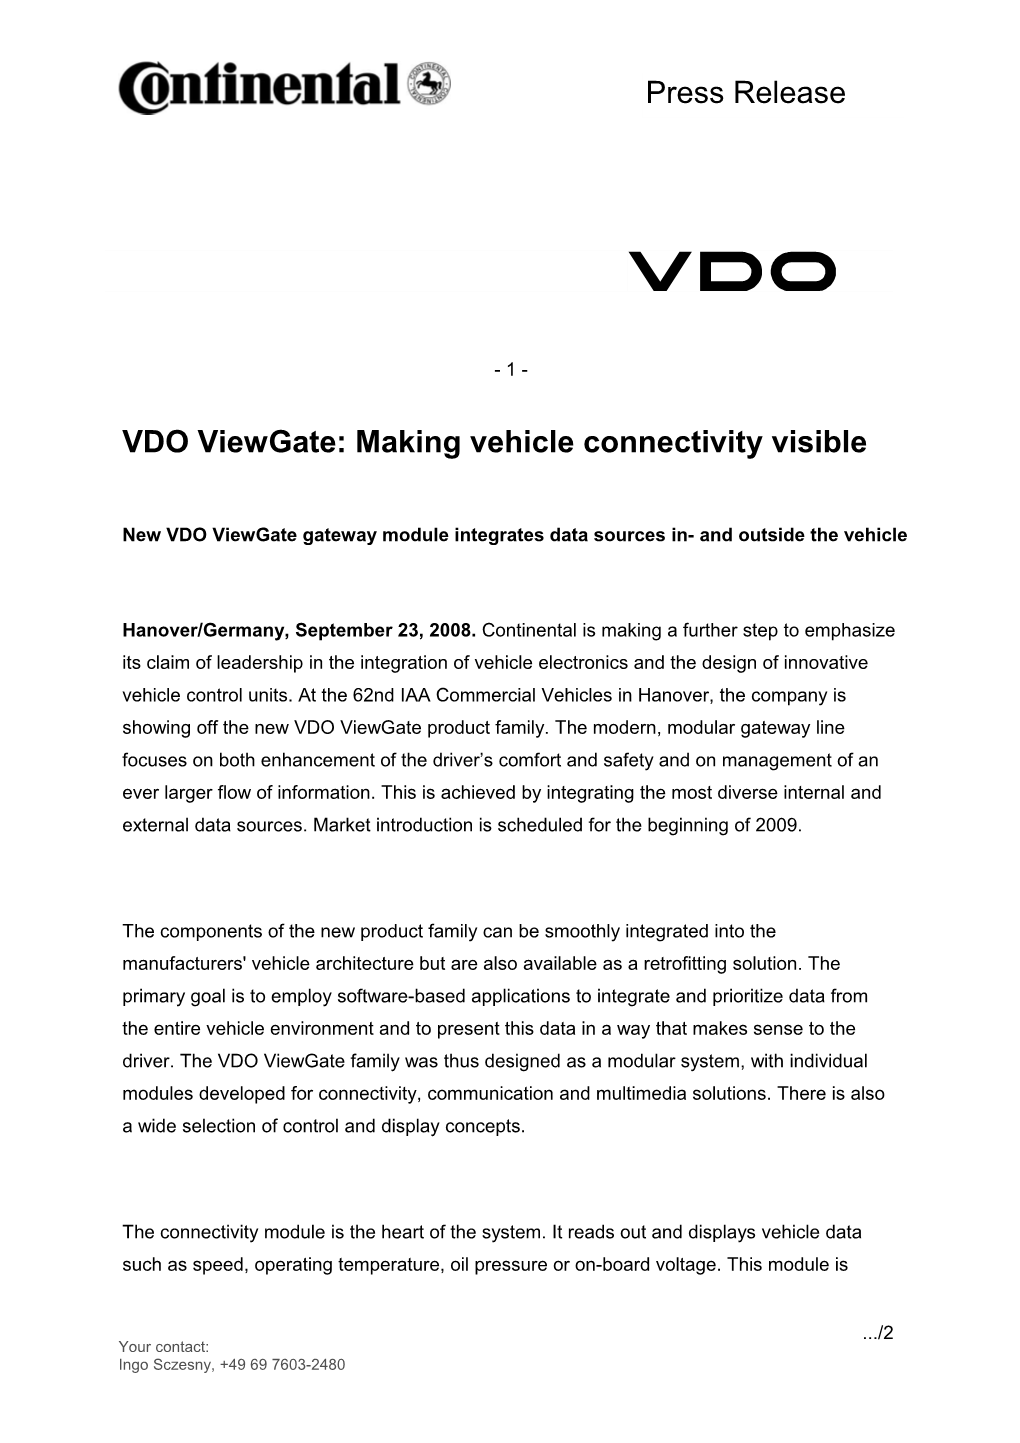 New VDO Viewgate Gateway Module Integrates Data Sources In- and Outside the Vehicle